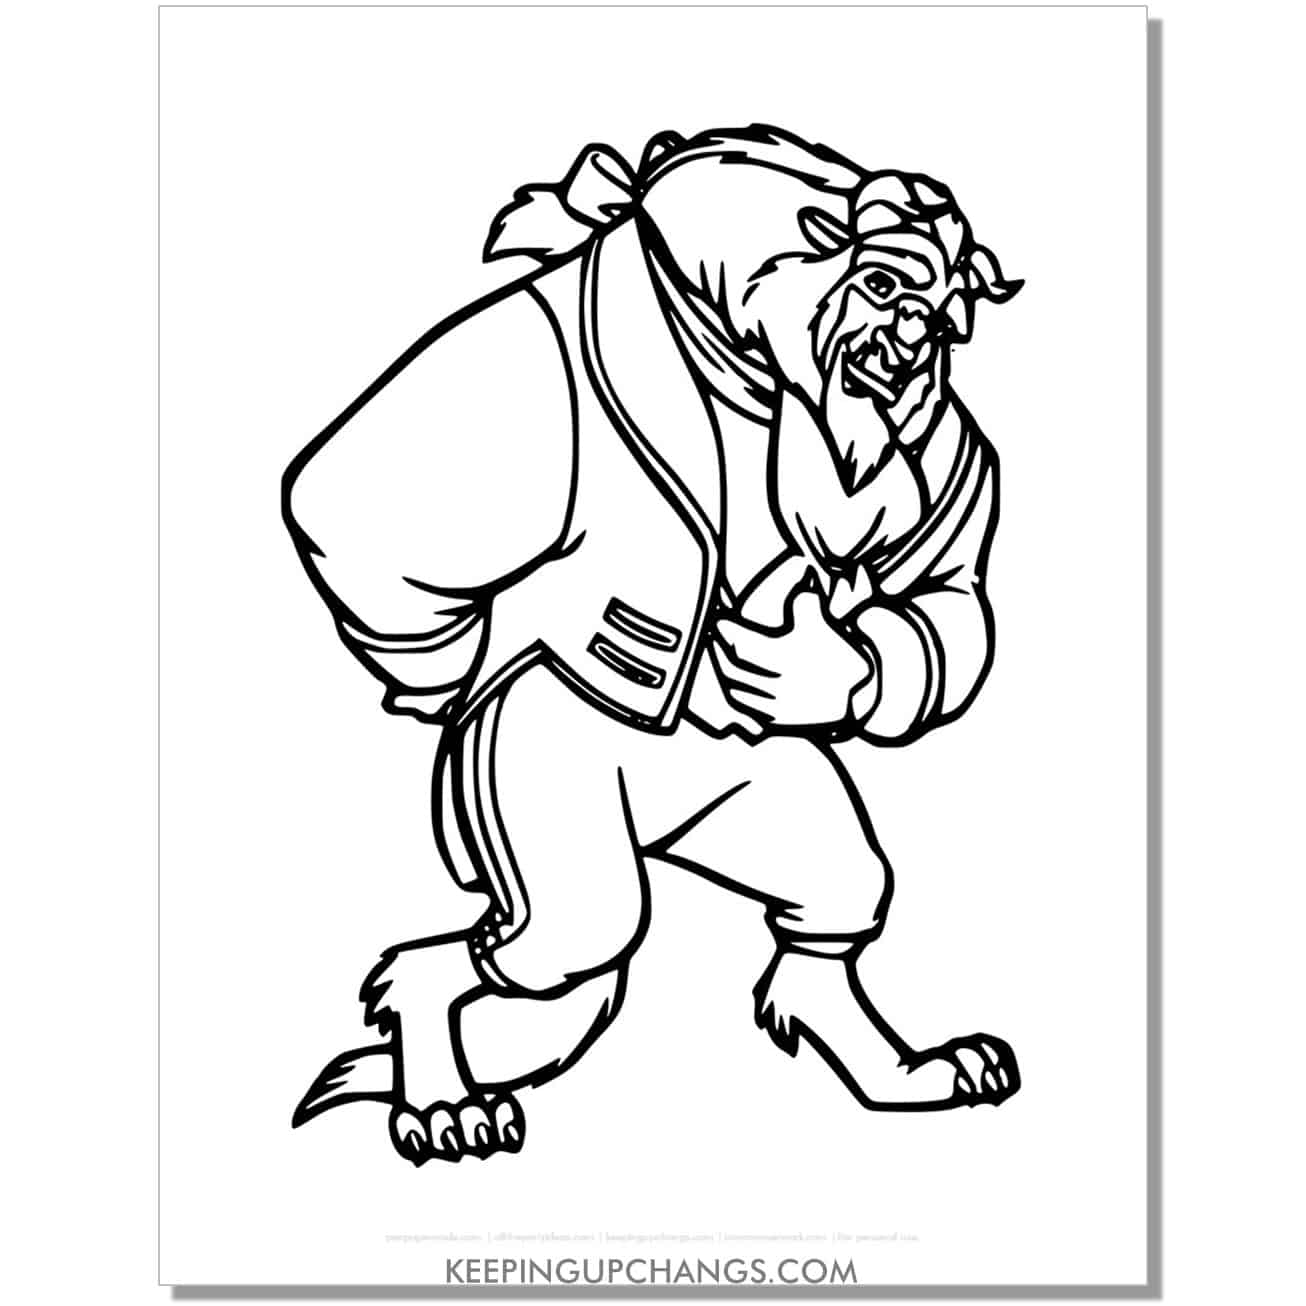 beast takes a bow coloring page, sheet.